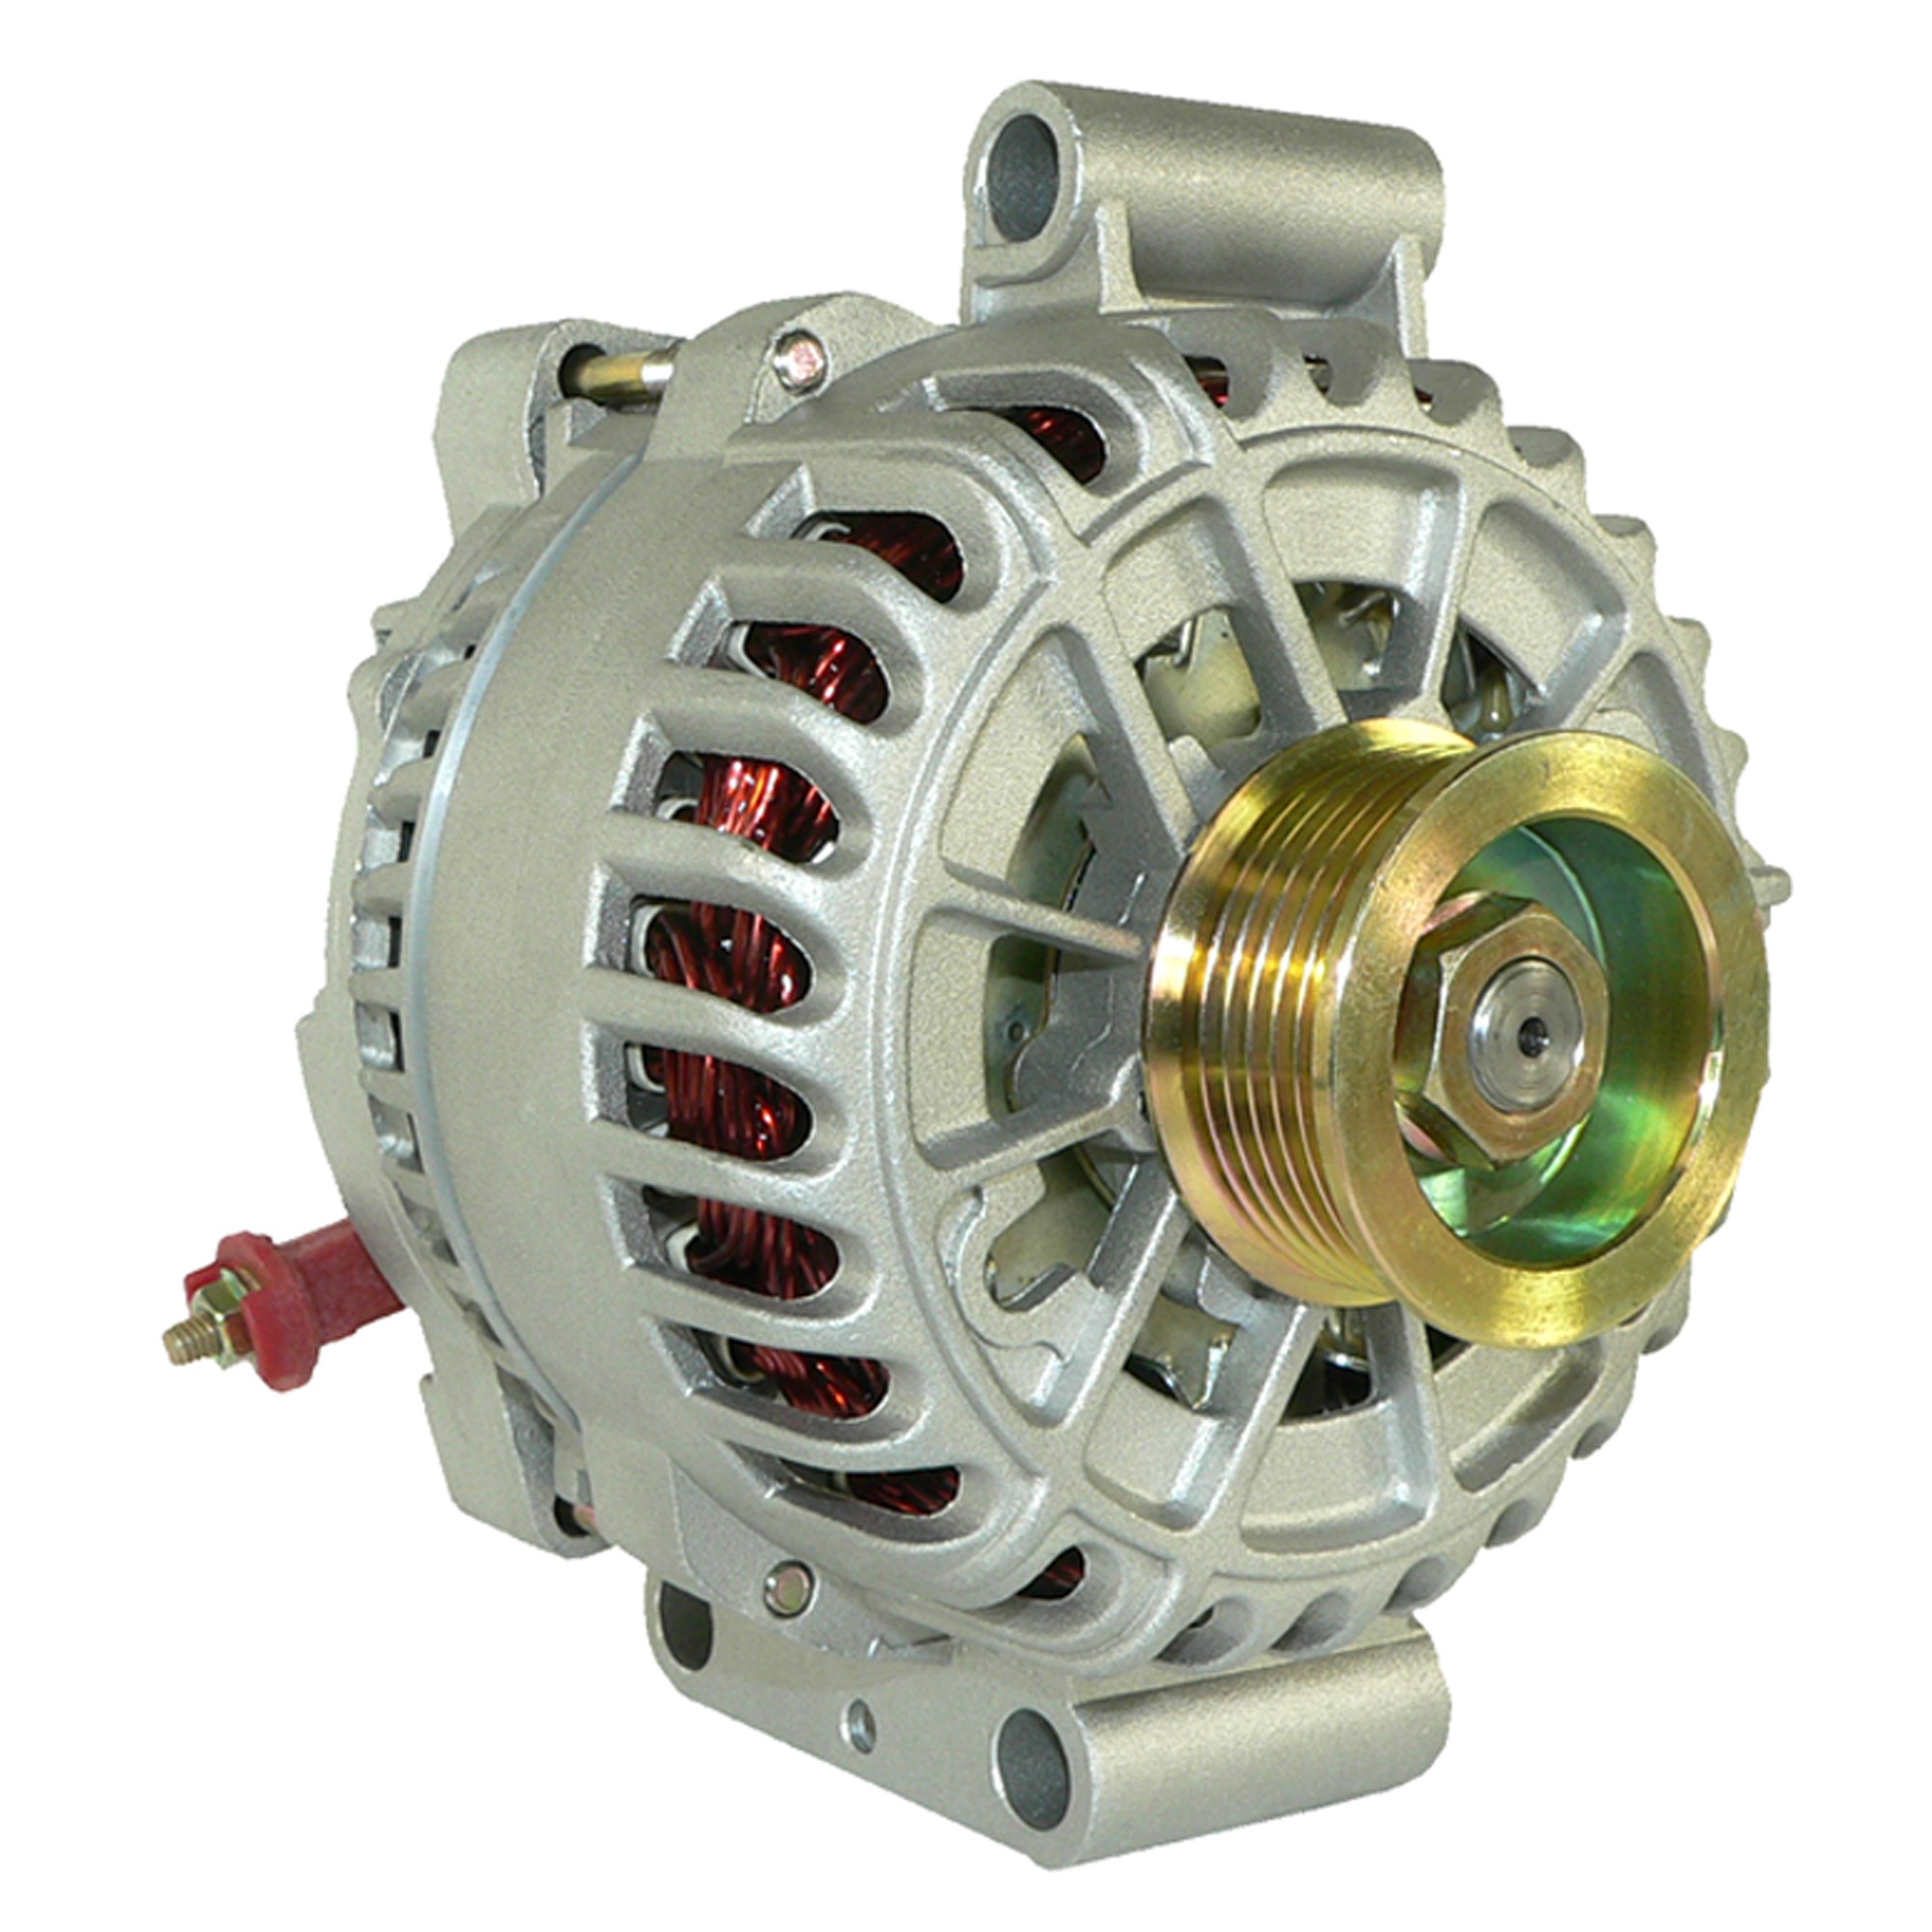 DB Electrical Alternator for 200 Amp 4.0L Ford Mustang 2005-2008; HO-8437-200